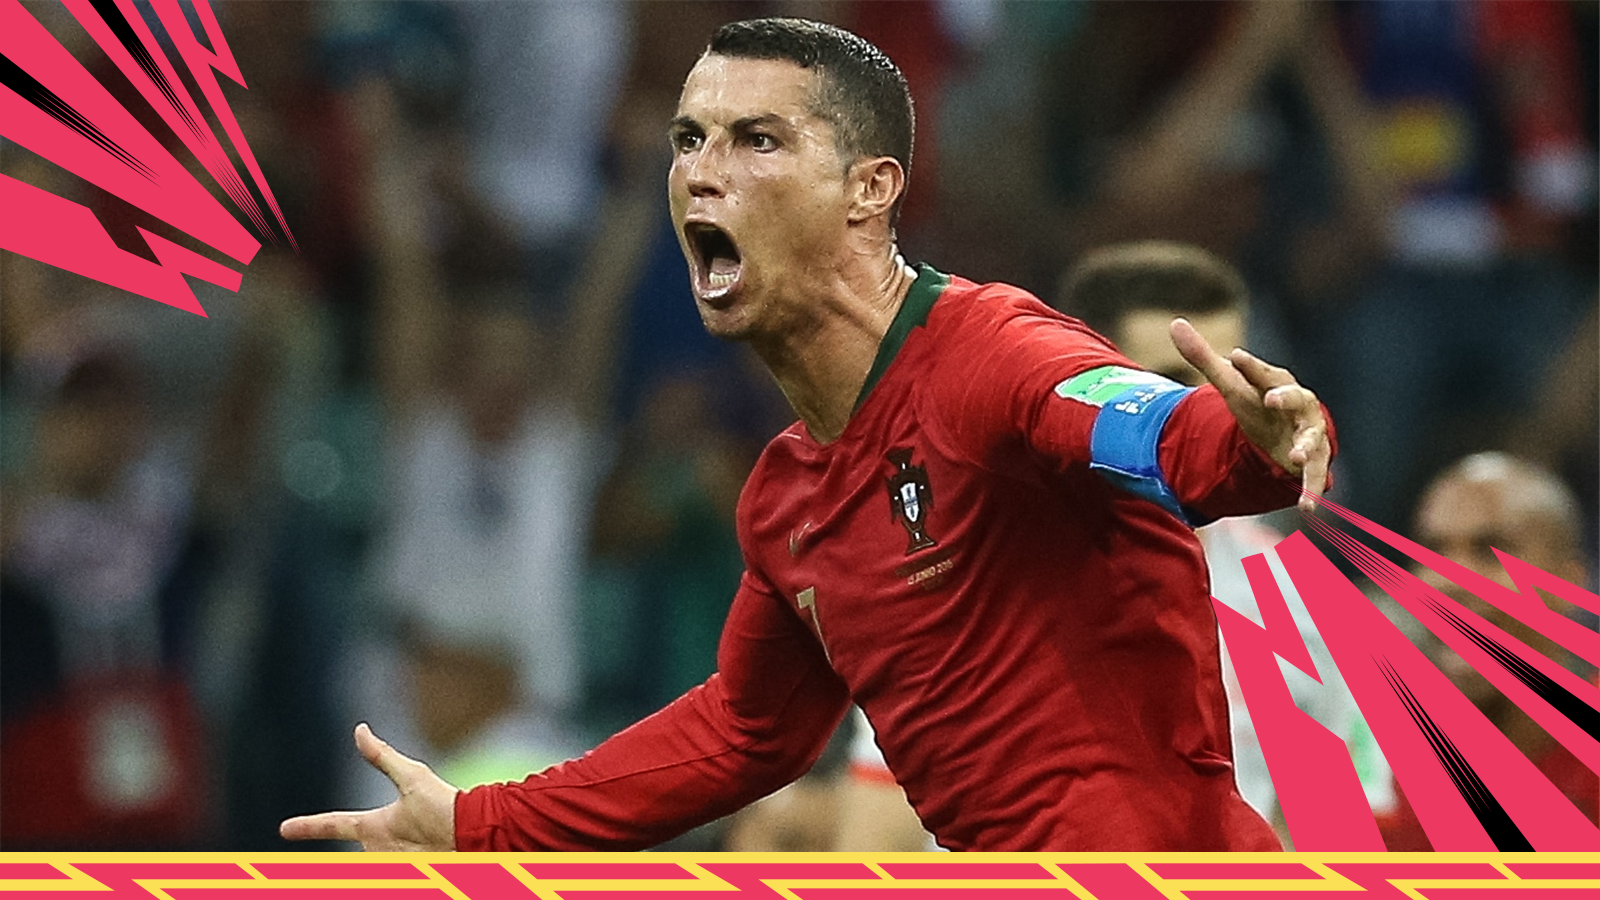 'The pressure is now on Messi' - relentless Ronaldo lights up World Cup